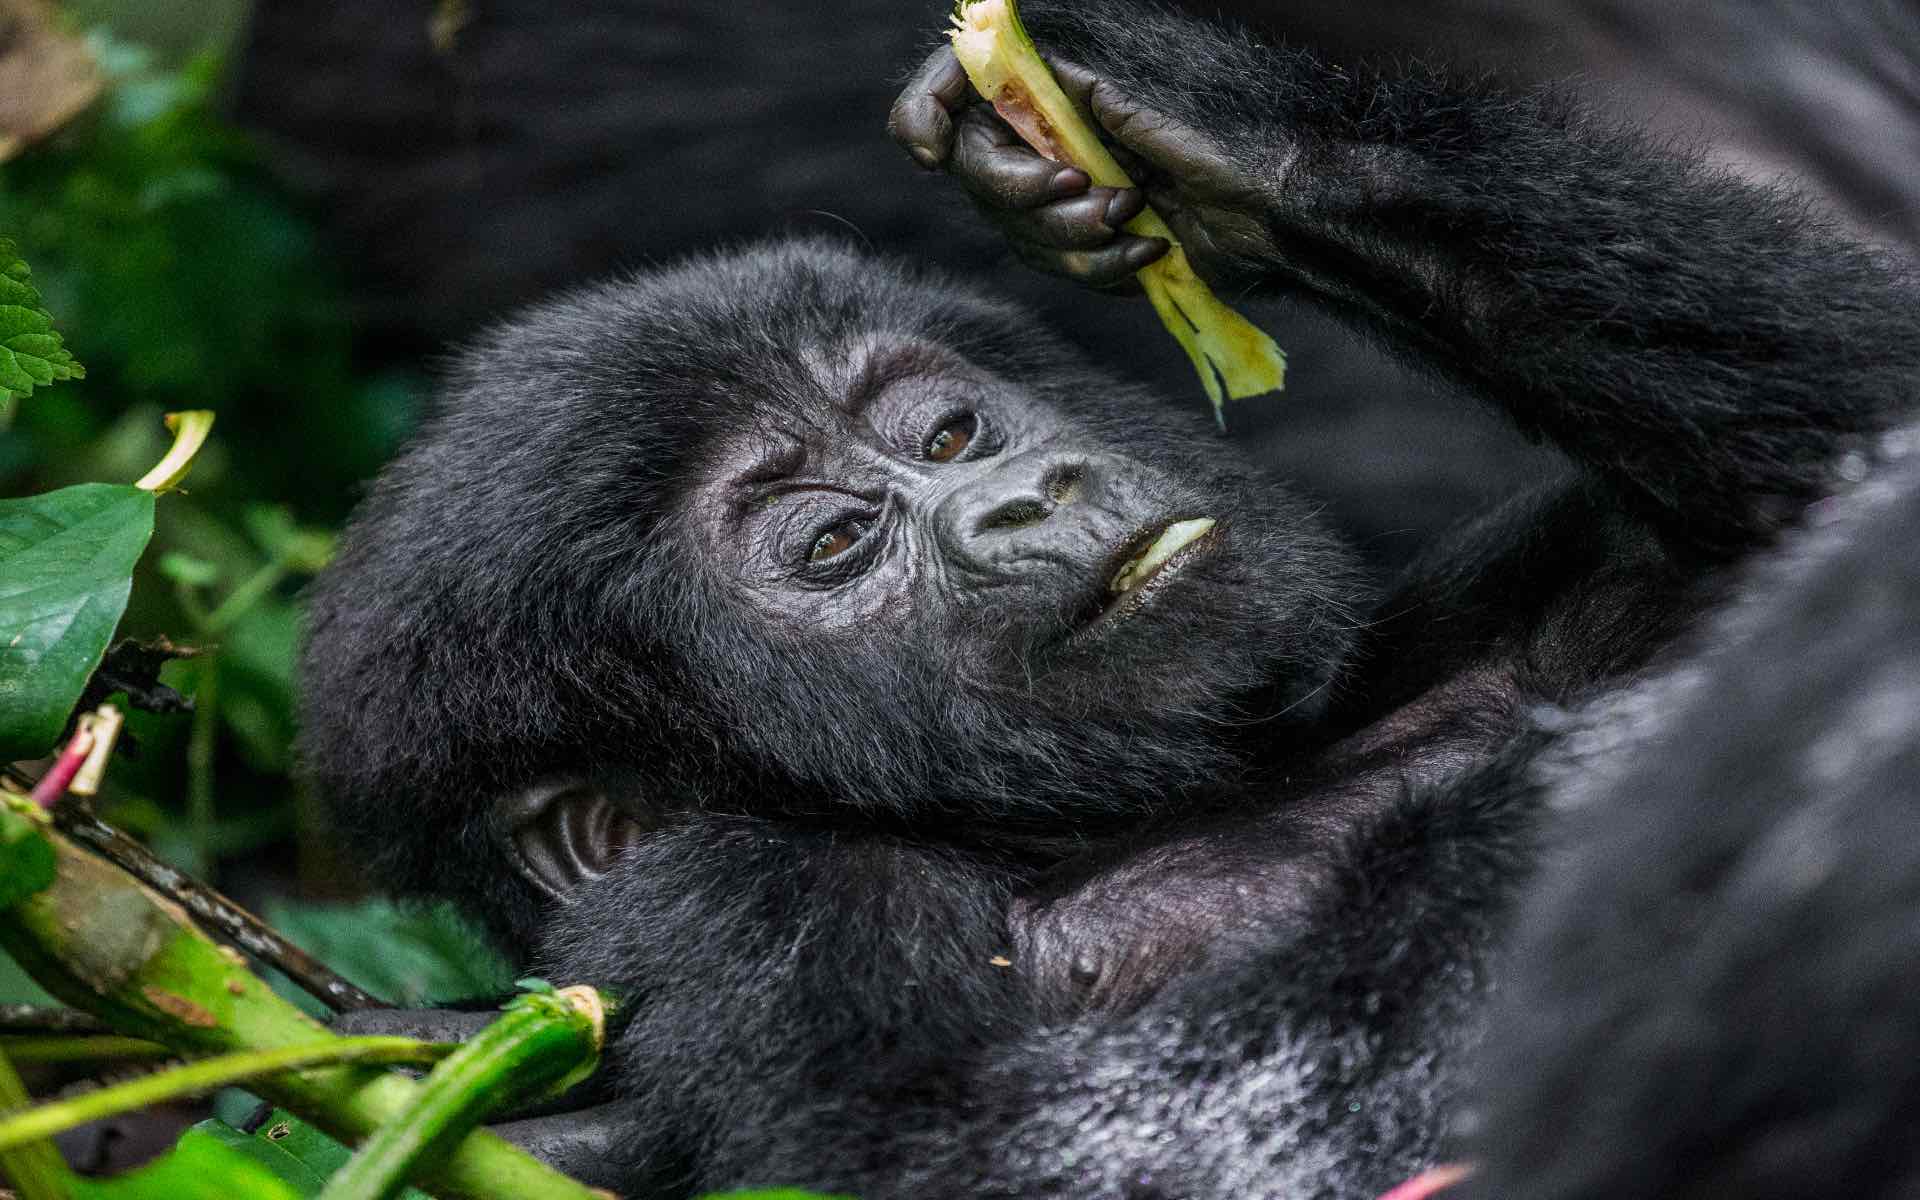 Get up close and personal with wild mountain gorillas in Rwanda